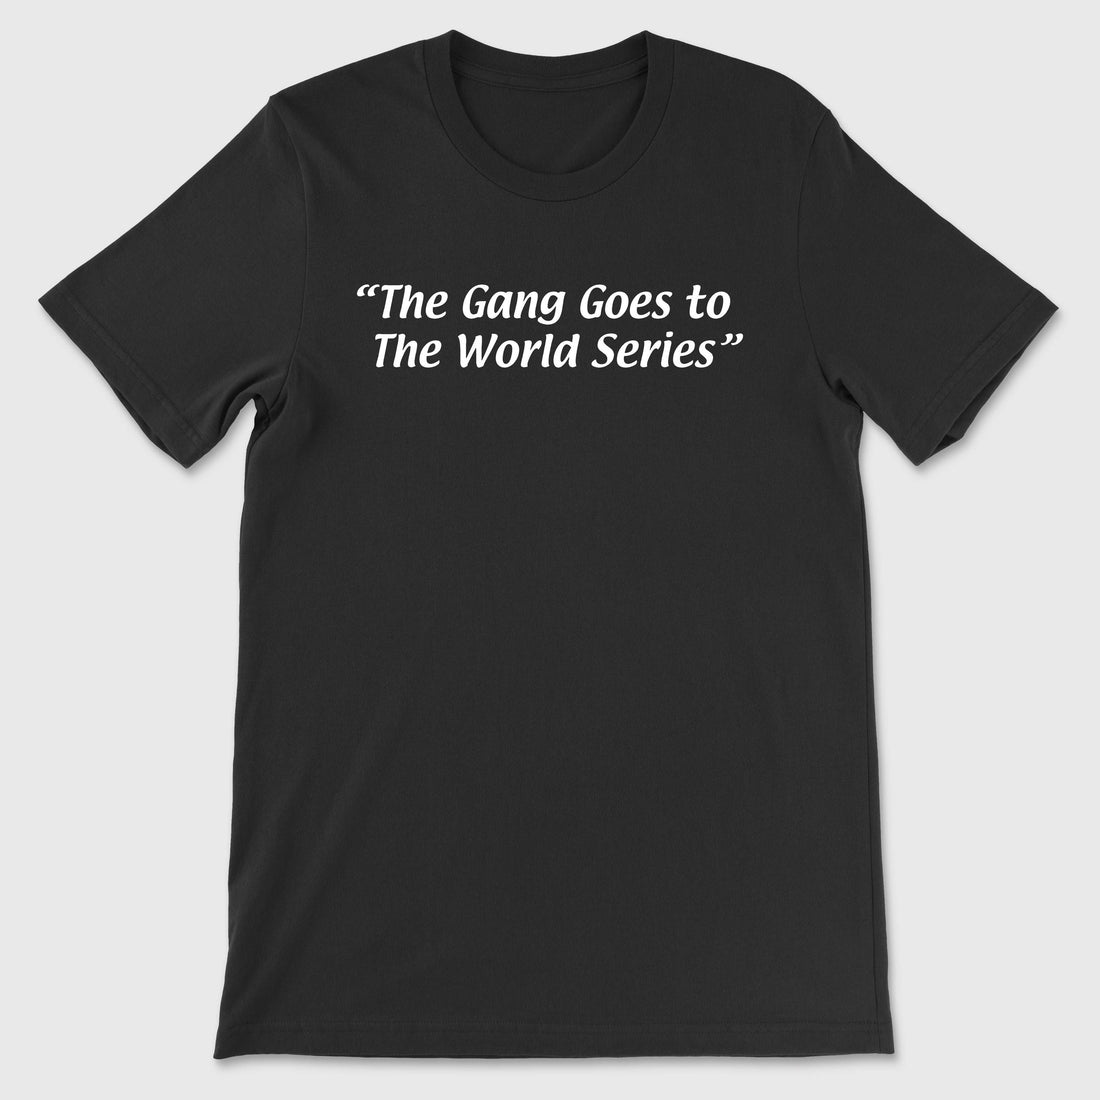 The Gang Goes to the World Series Tee